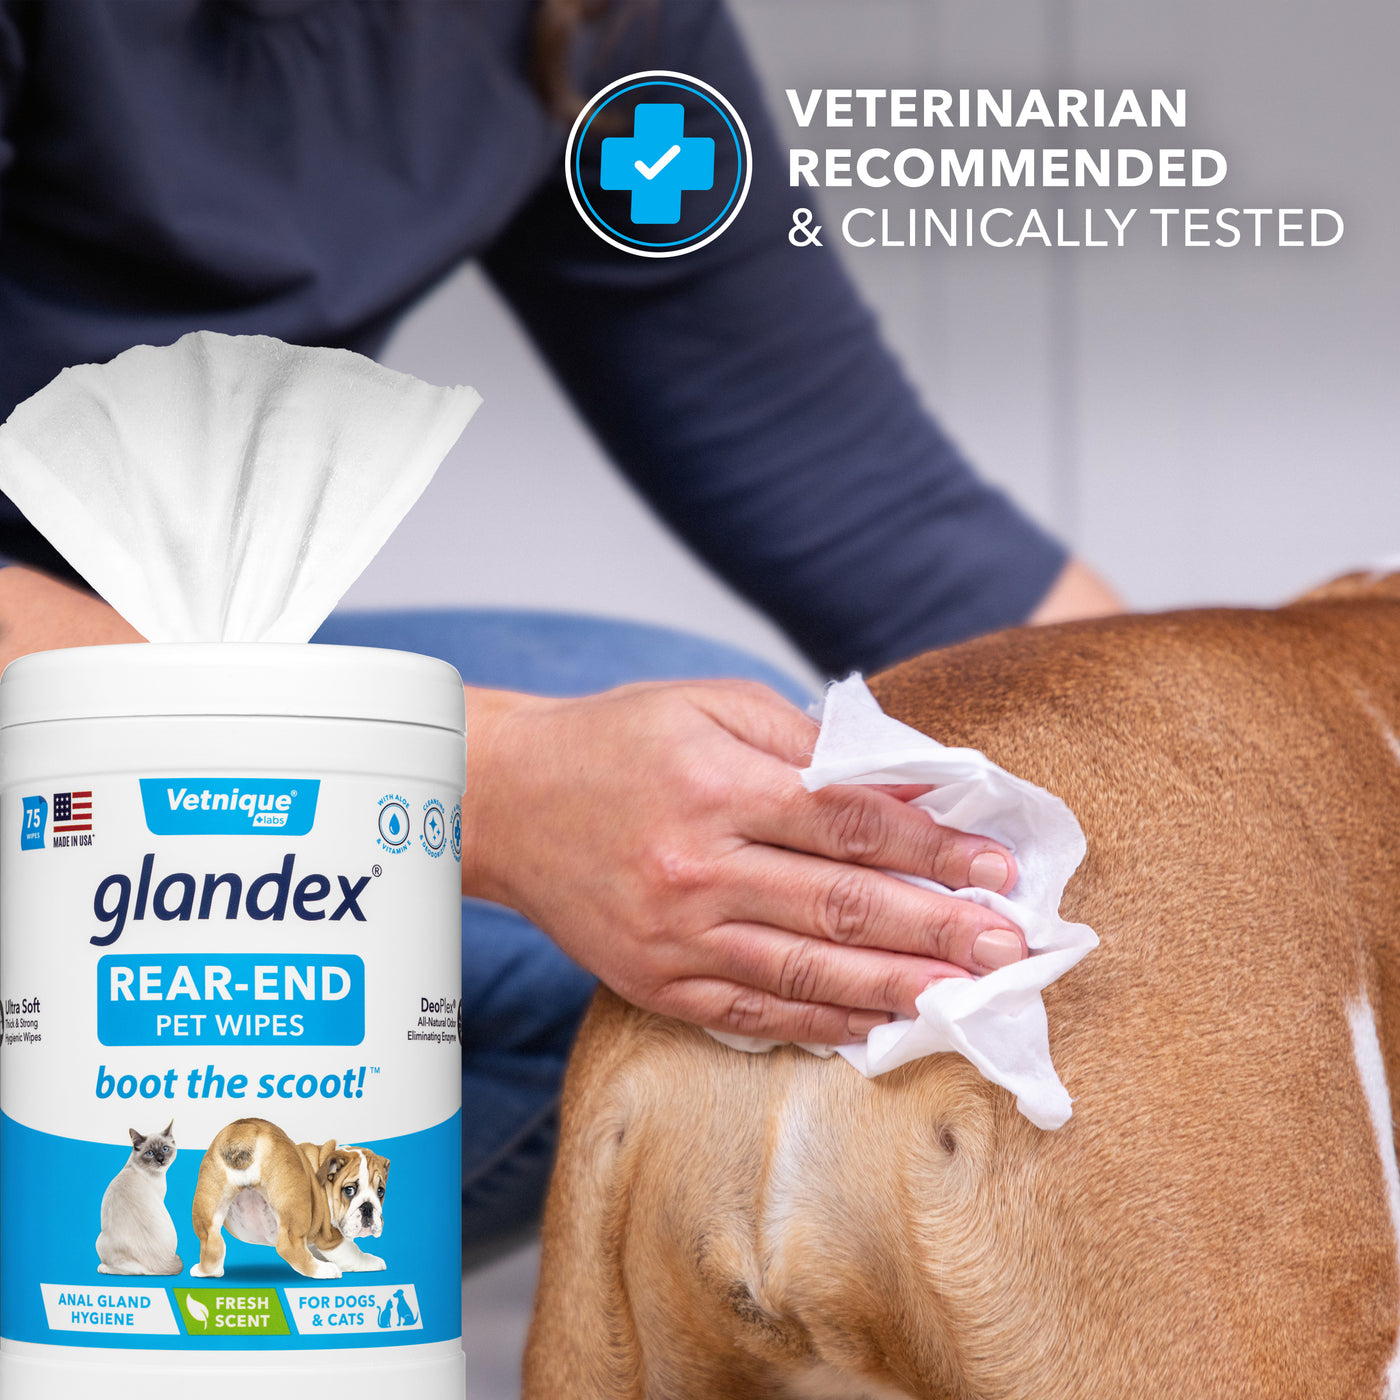 Veterinarian Recommended and Clinically Tested